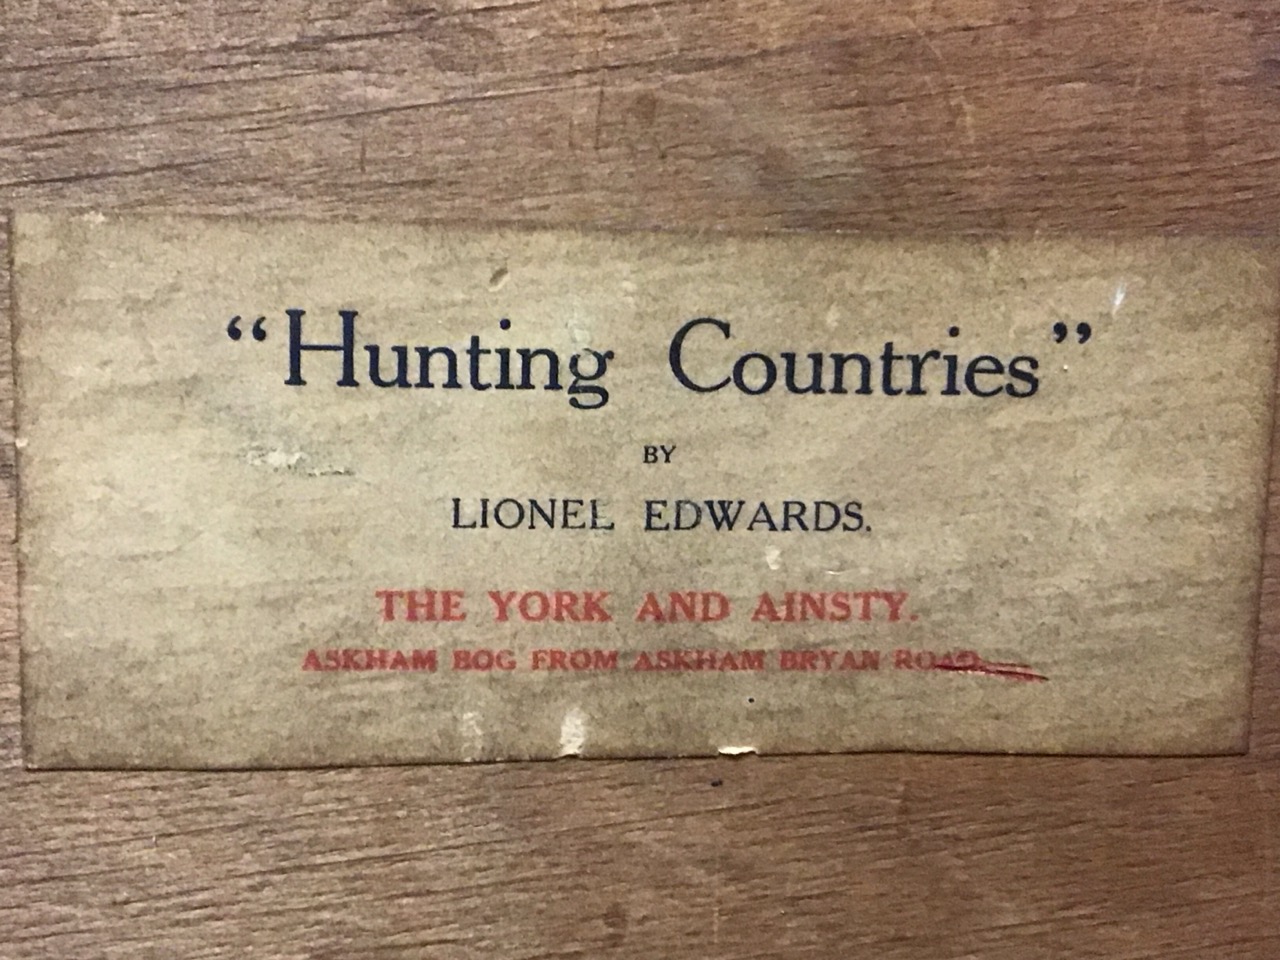 Lionel Edwards, coloured print, hunt in landscape, from the Hunting Countries series, signed and - Image 3 of 3